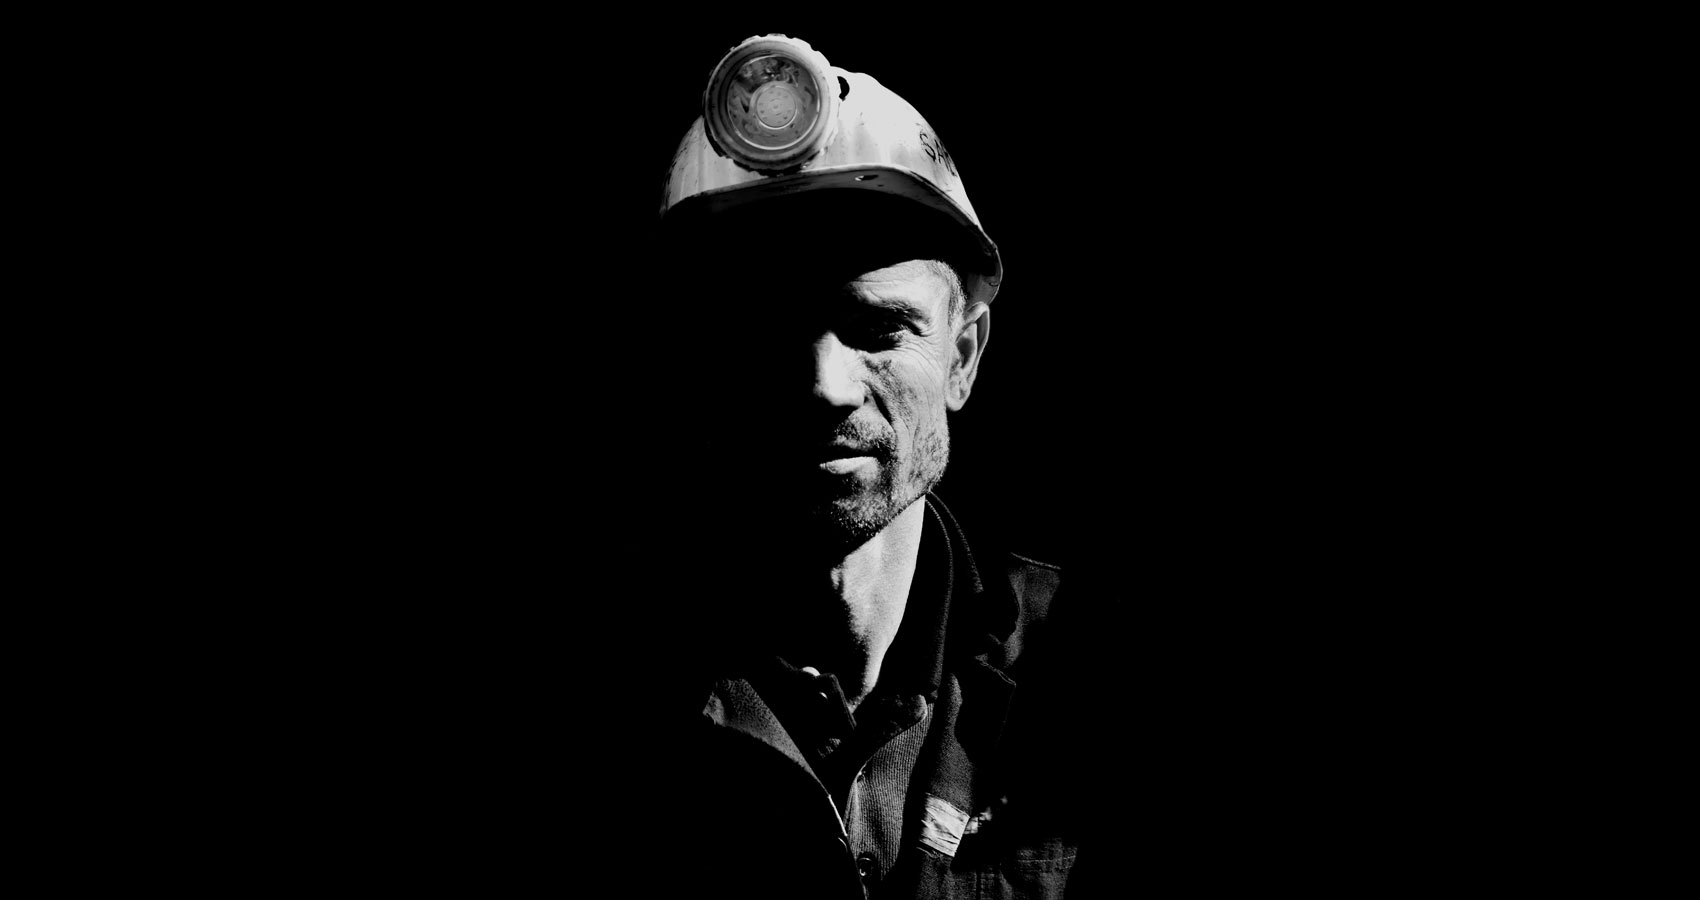 FOR ALEC W JAMES COAL MINER WITH THE ANGELS, poem by Grendad at Spillwords.com